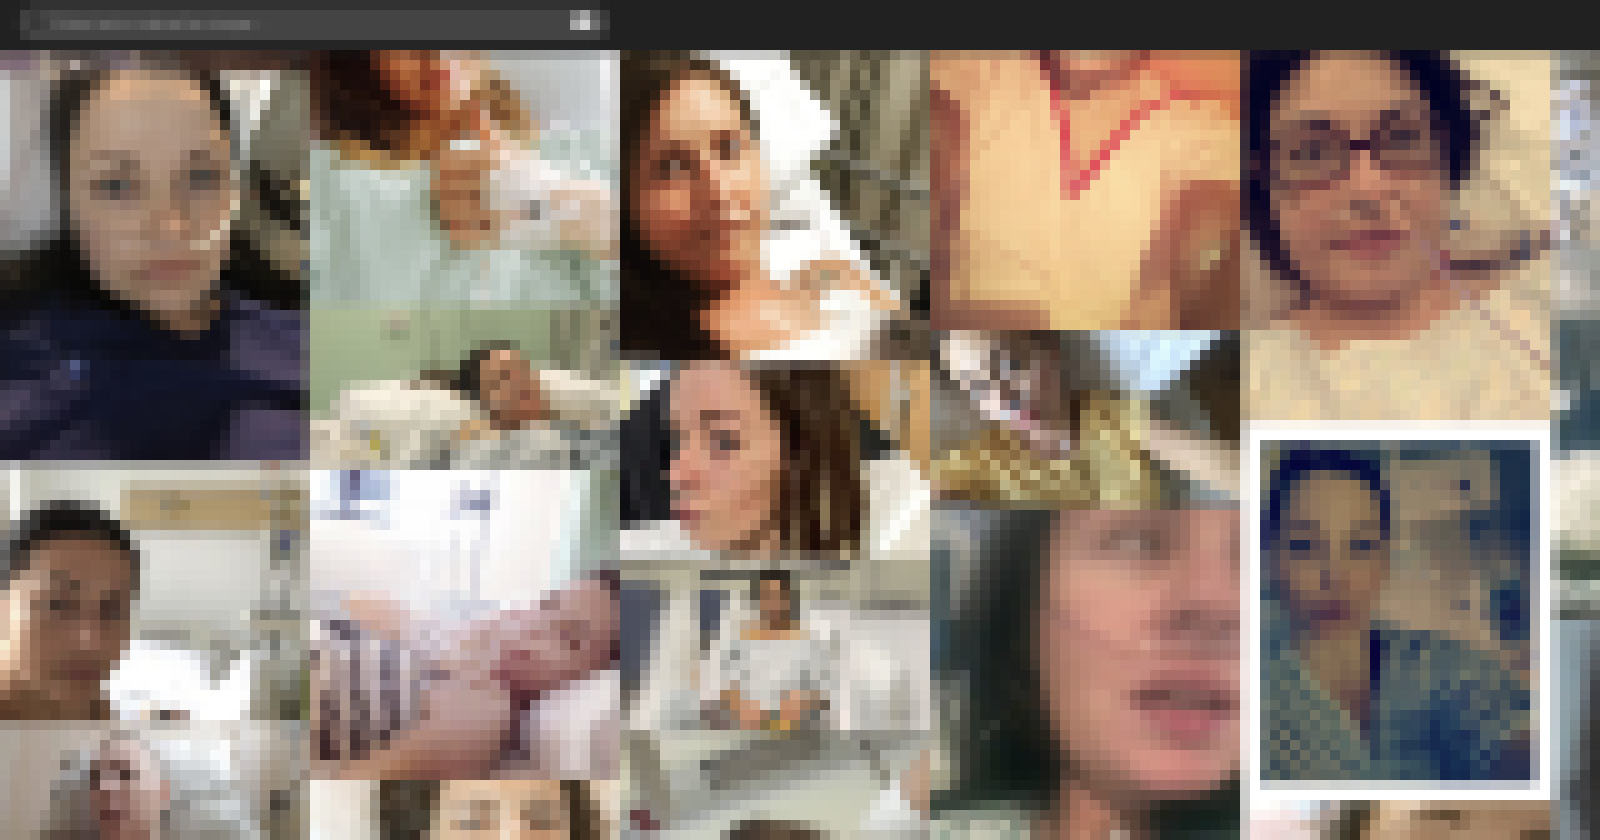  shocked artist finds private medical photos training data 